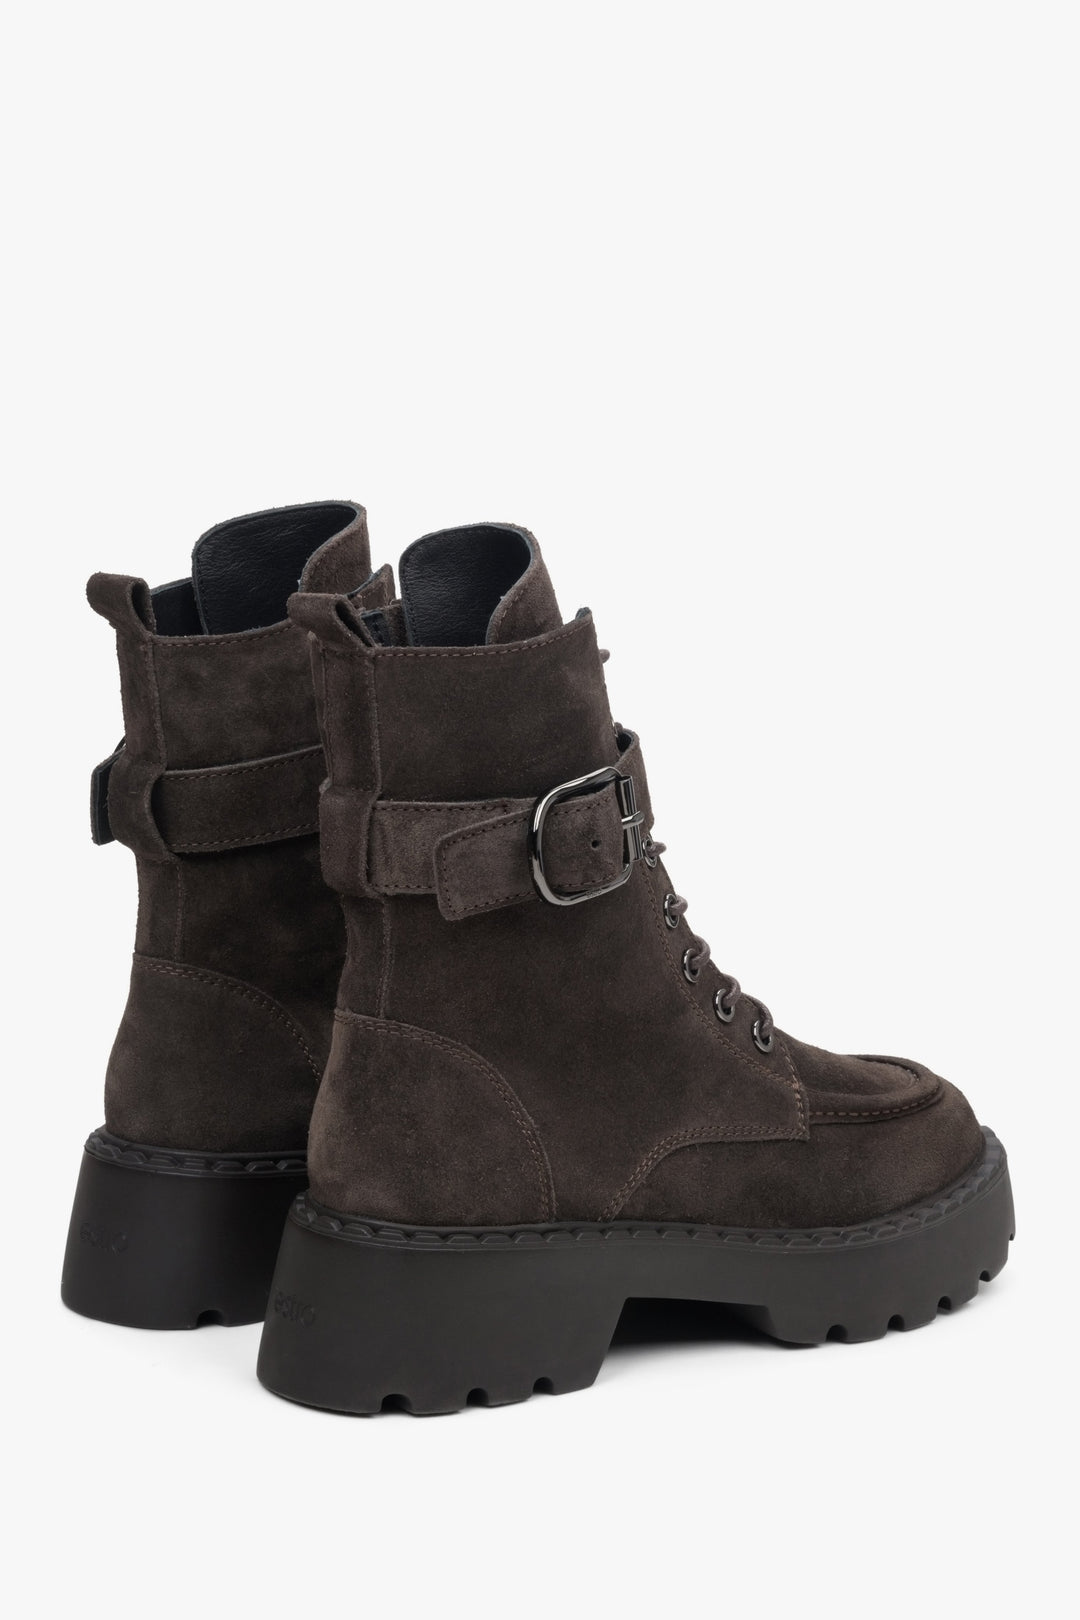 Women's high velour boots in dark brown - close-up of the shoe profile and the back.